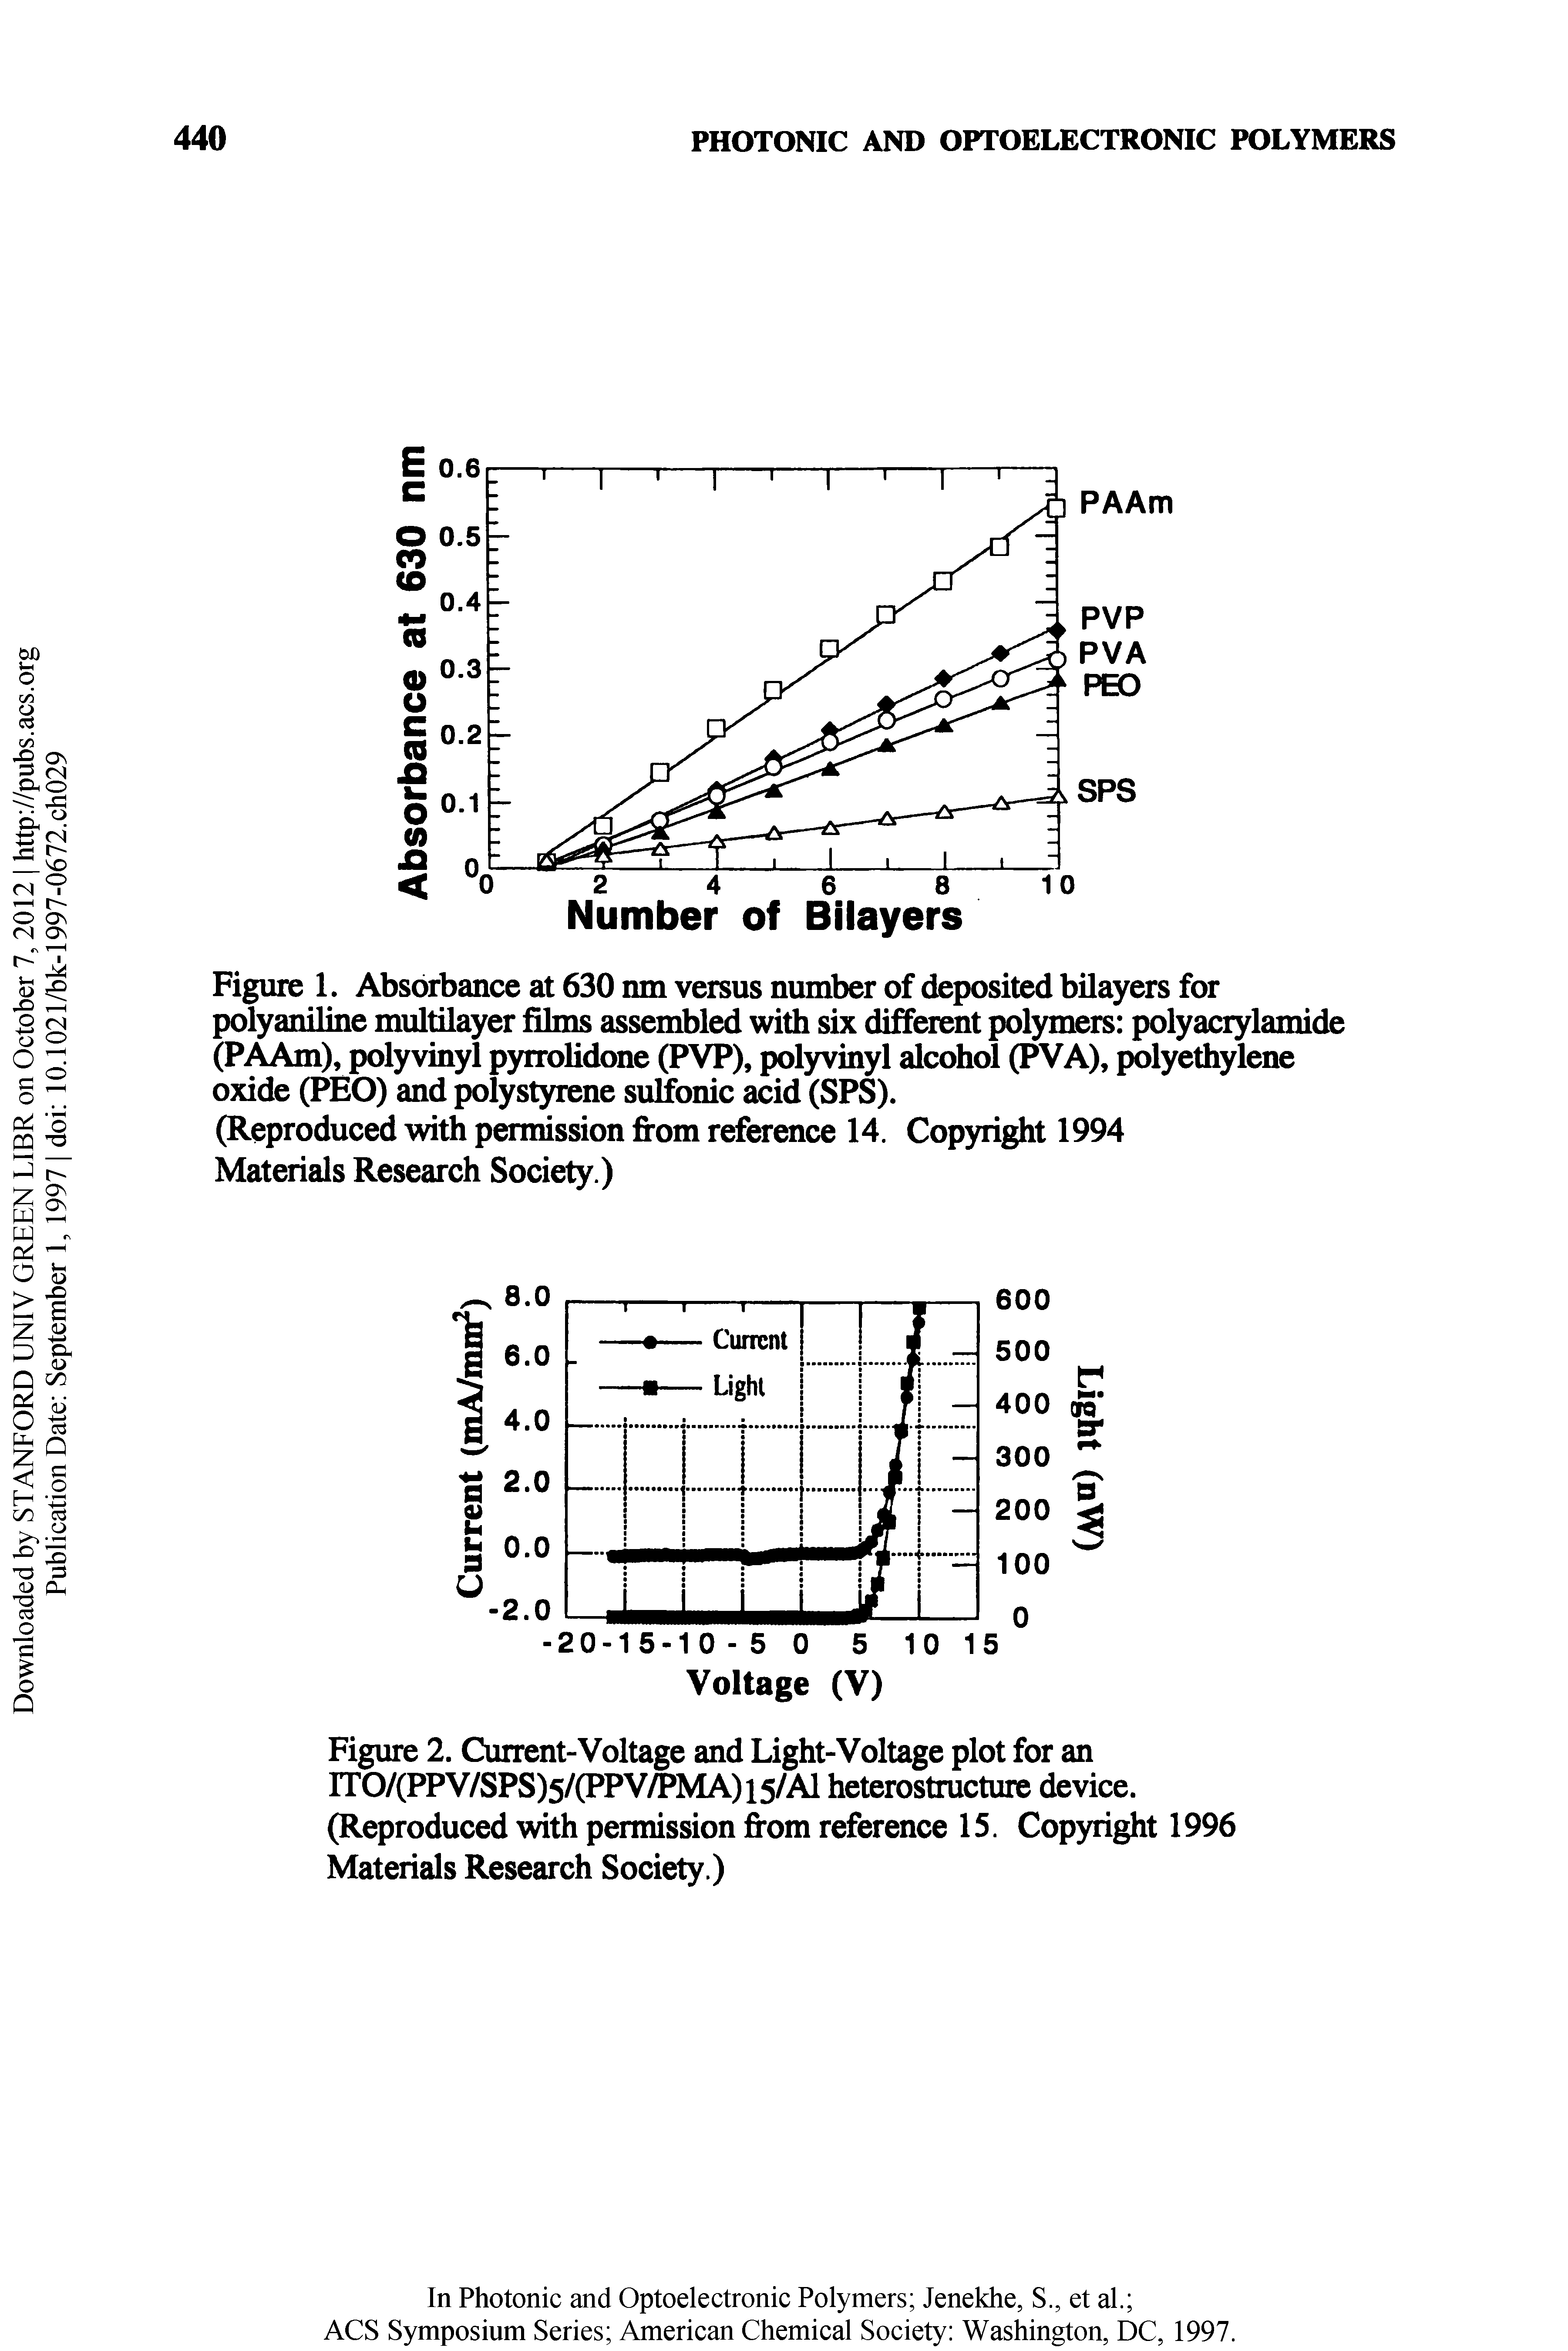 Figure 1. Absorbance at 630 nm versus number of deposited bilayers for polyaniline multilayer films assembled widi six different polymers polyacrylamide (PAAm), polyvinyl pyrrolidone (PVP), jwlyvinyl alcohol (PVA), polyethylene oxide (PEO) and polystyrene sulfonic acid (SPS).